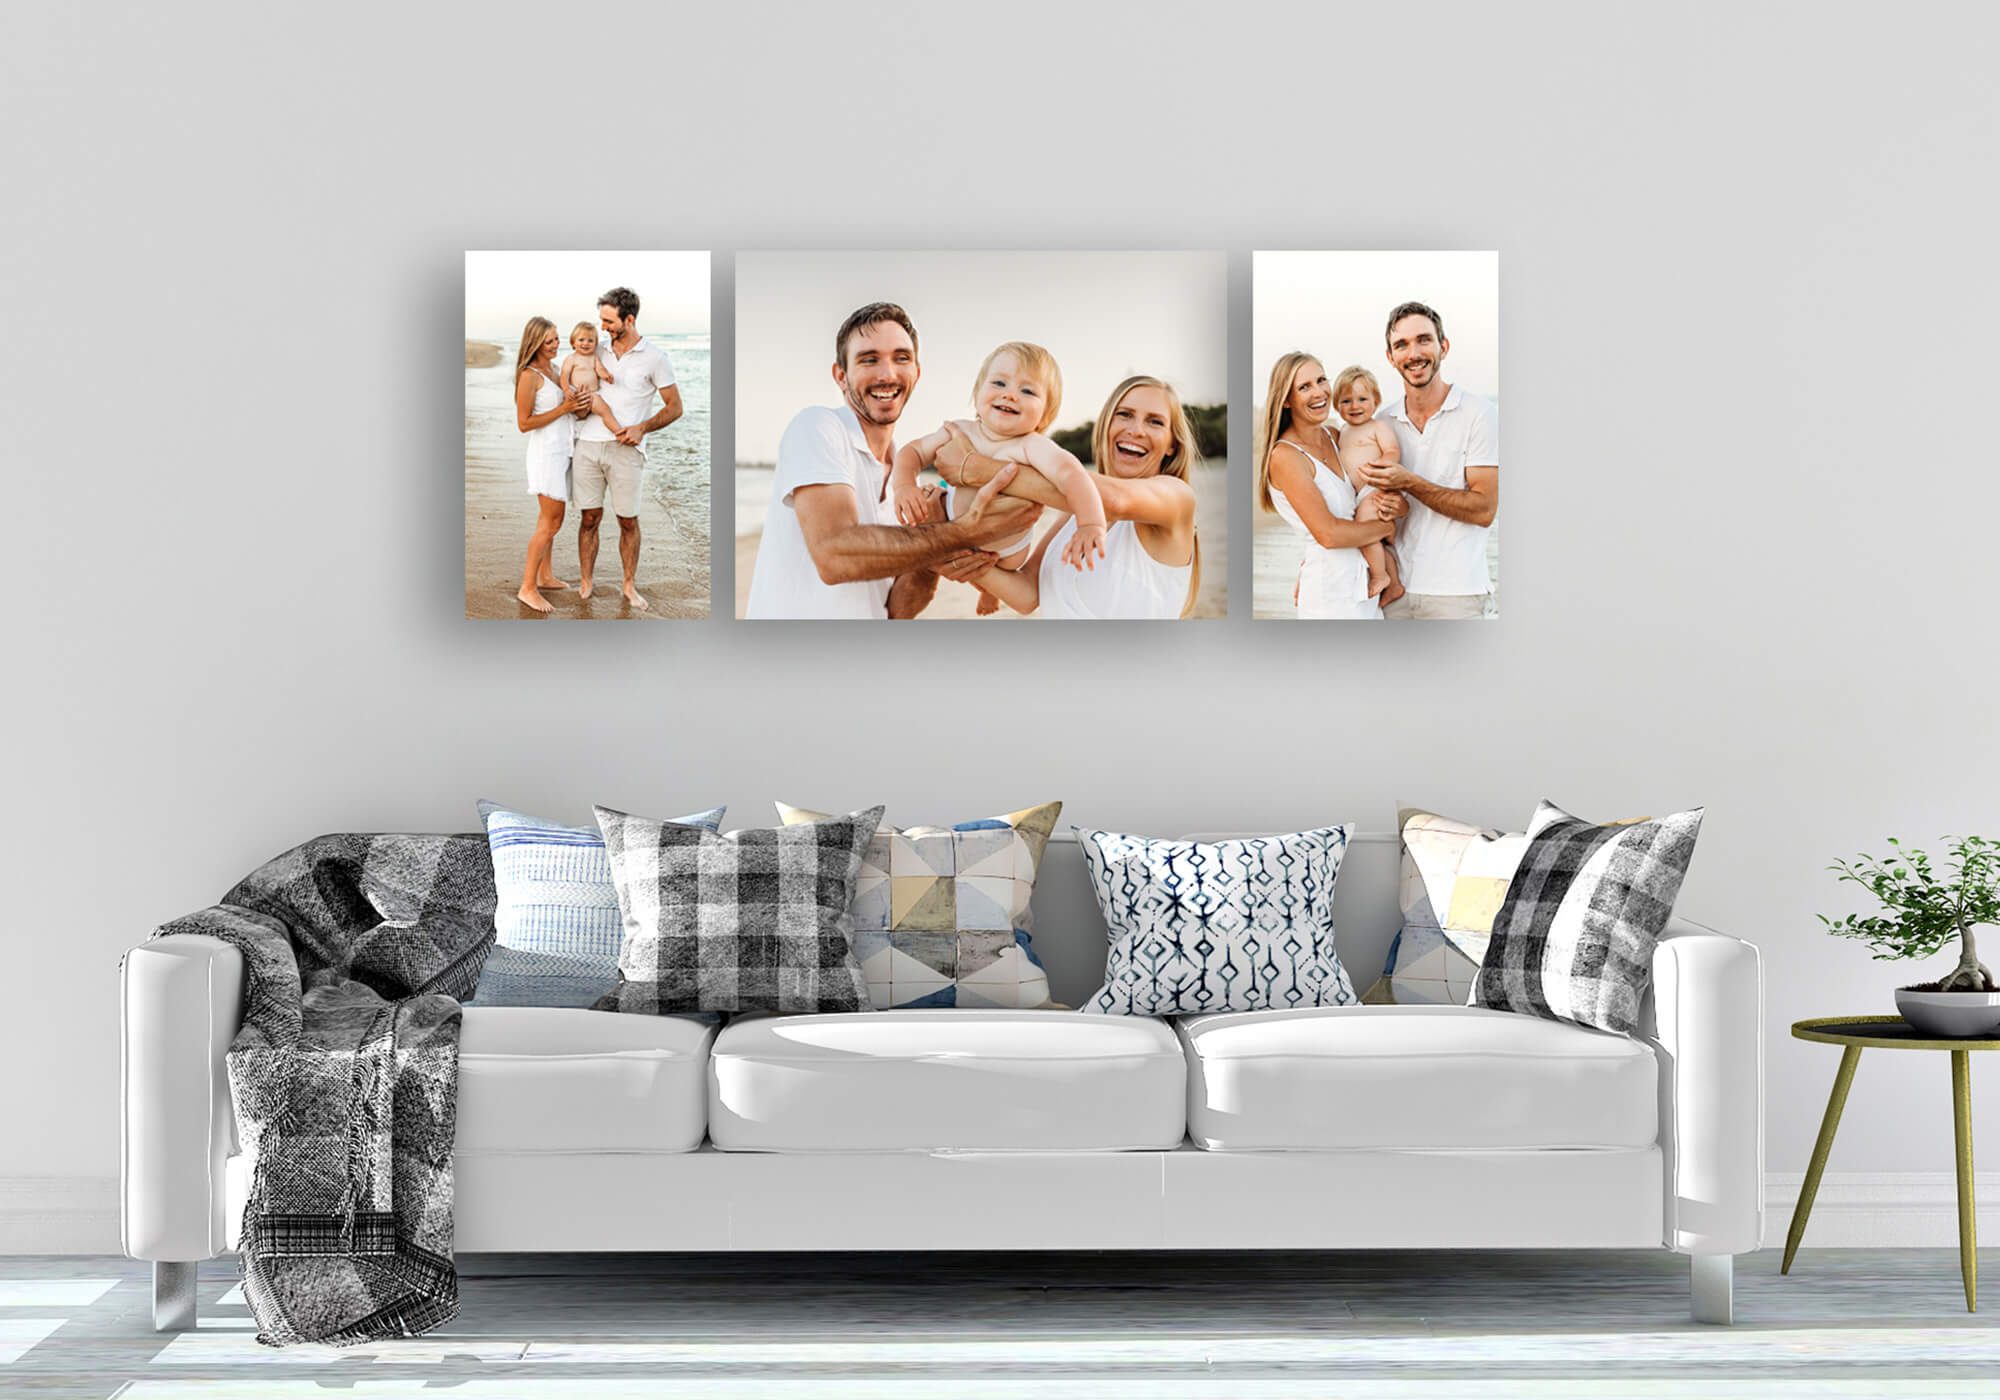 Lake wall art collection family of three